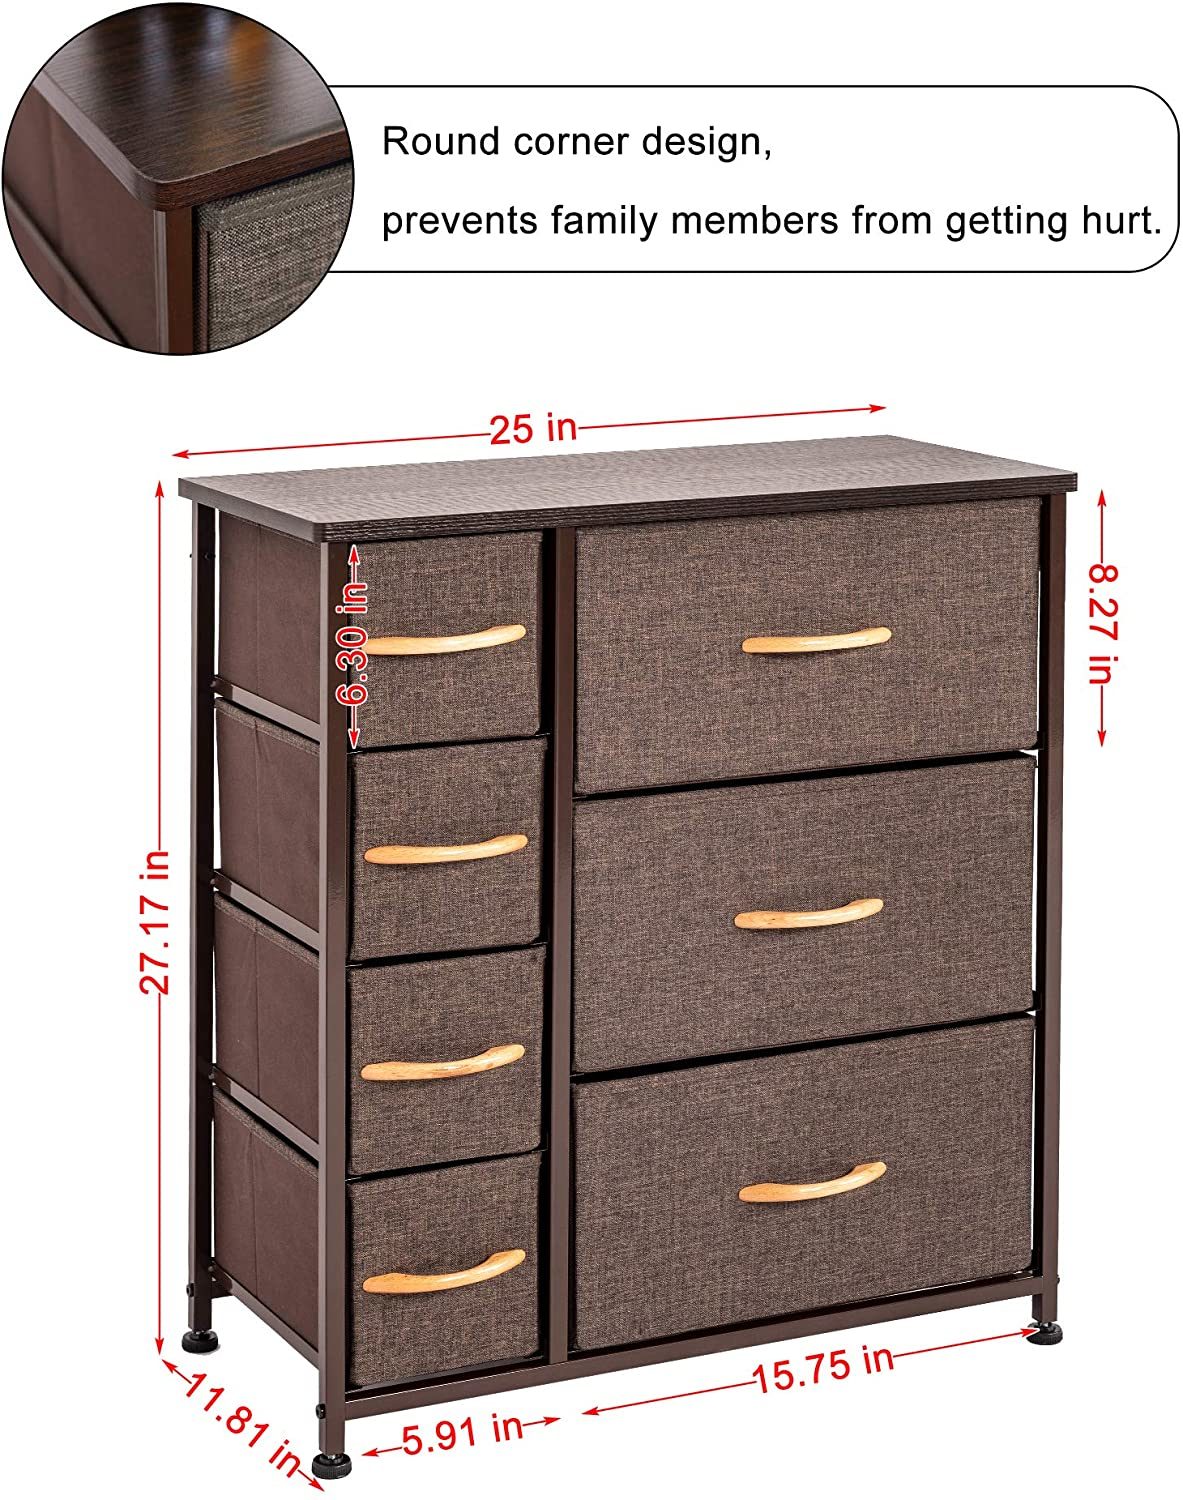 Dresser Storage Tower with 7 Drawers, Sturdy Steel Frame, Wood Top, Easy Pull Fabric Bins, Wood Handles, Organizer Unit for Bedroom, Entryway, Hallway, Closets - Brown